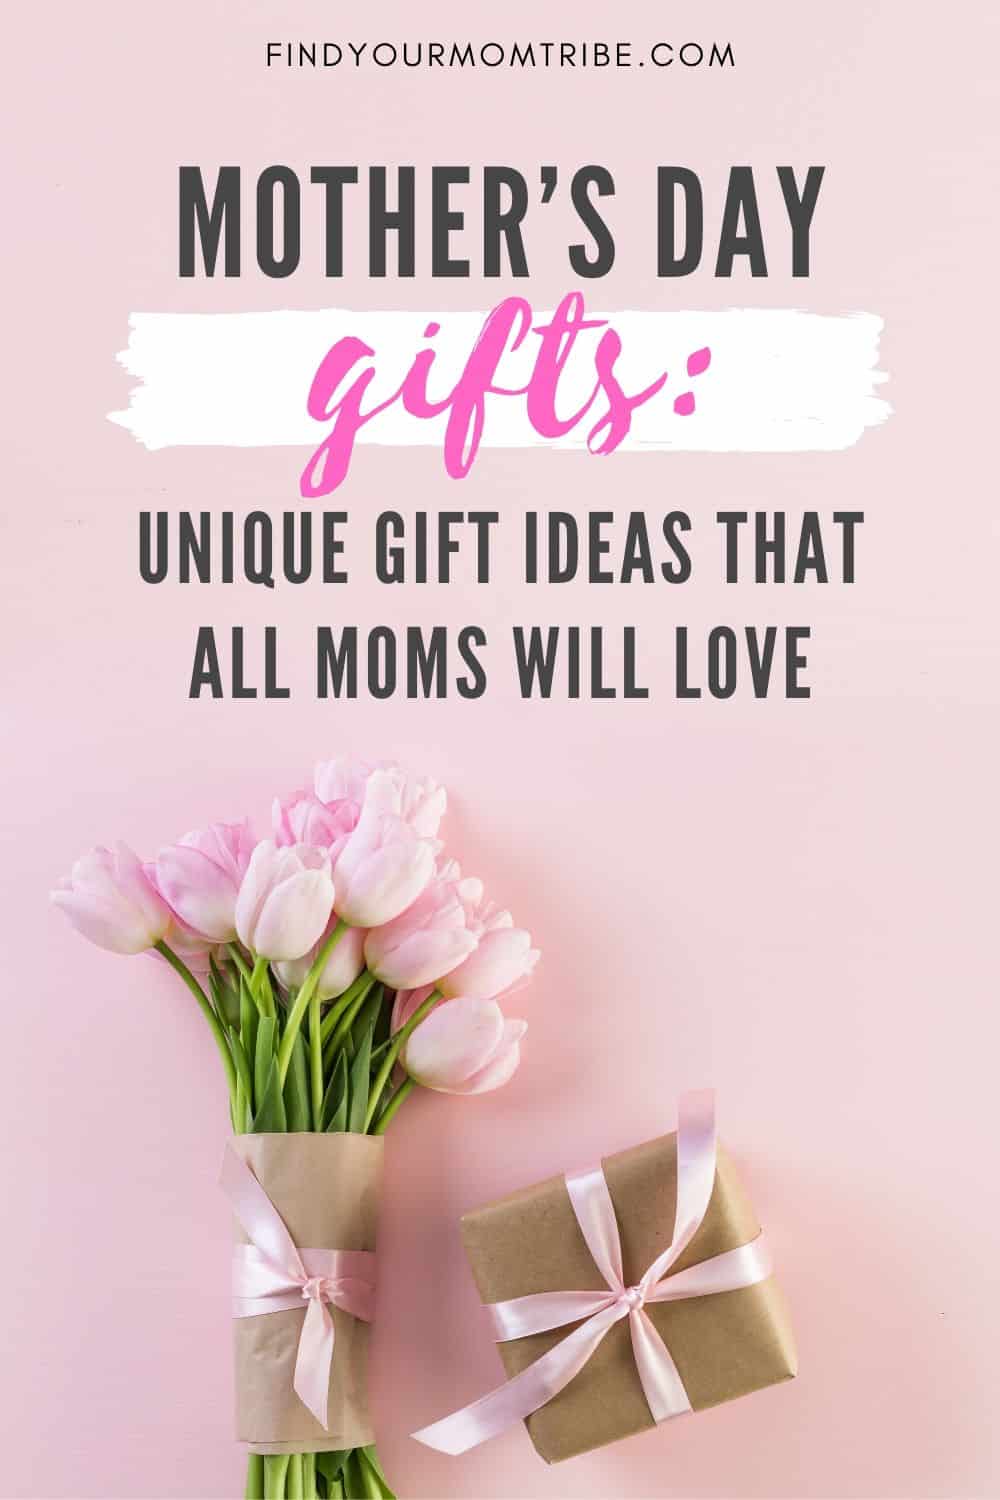 Pinterest Mother's Day Gifts